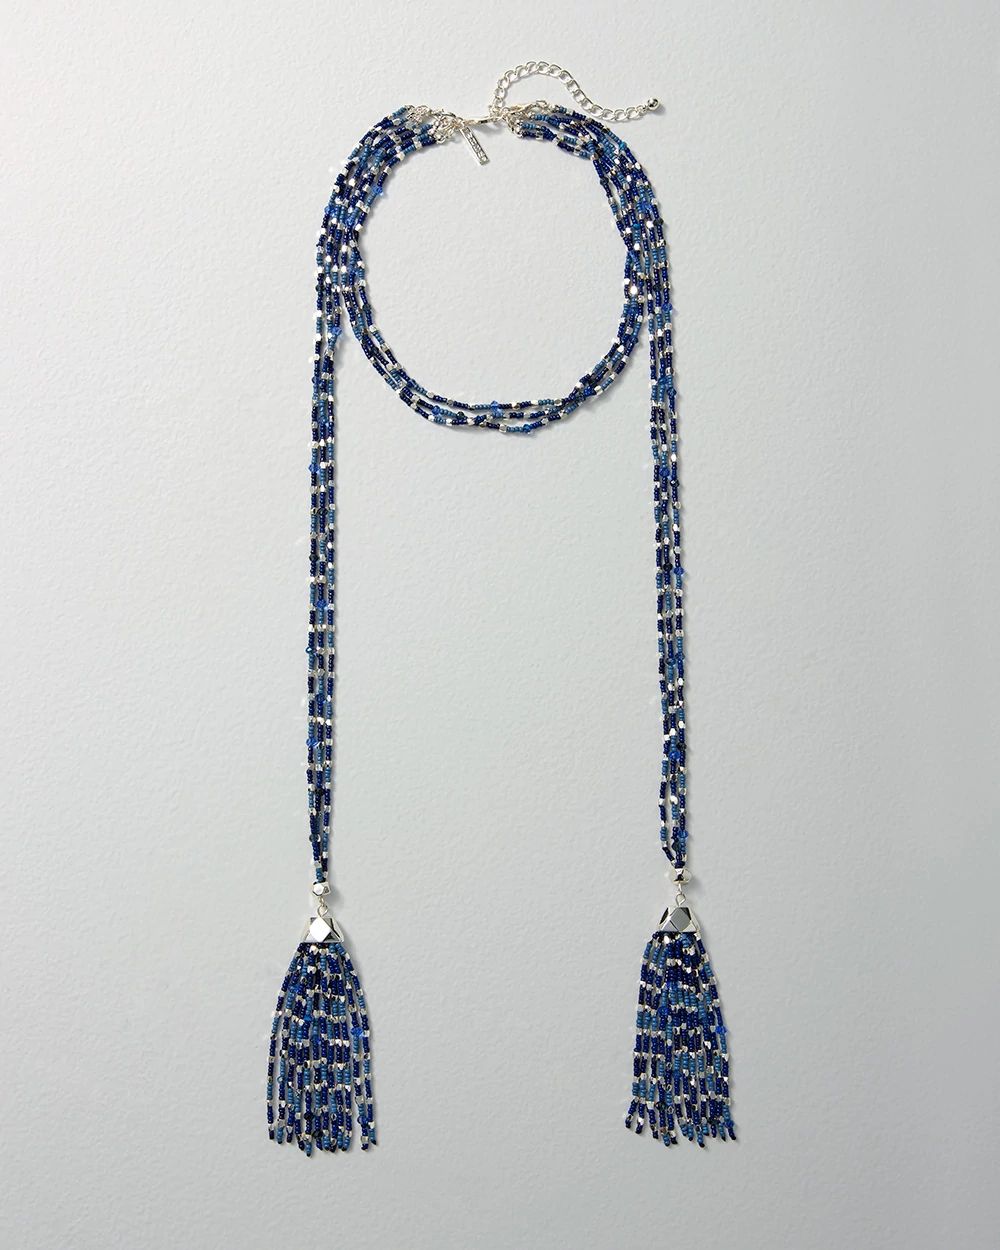 Denim Blue Multi-Strand Tassel Necklace click to view larger image.